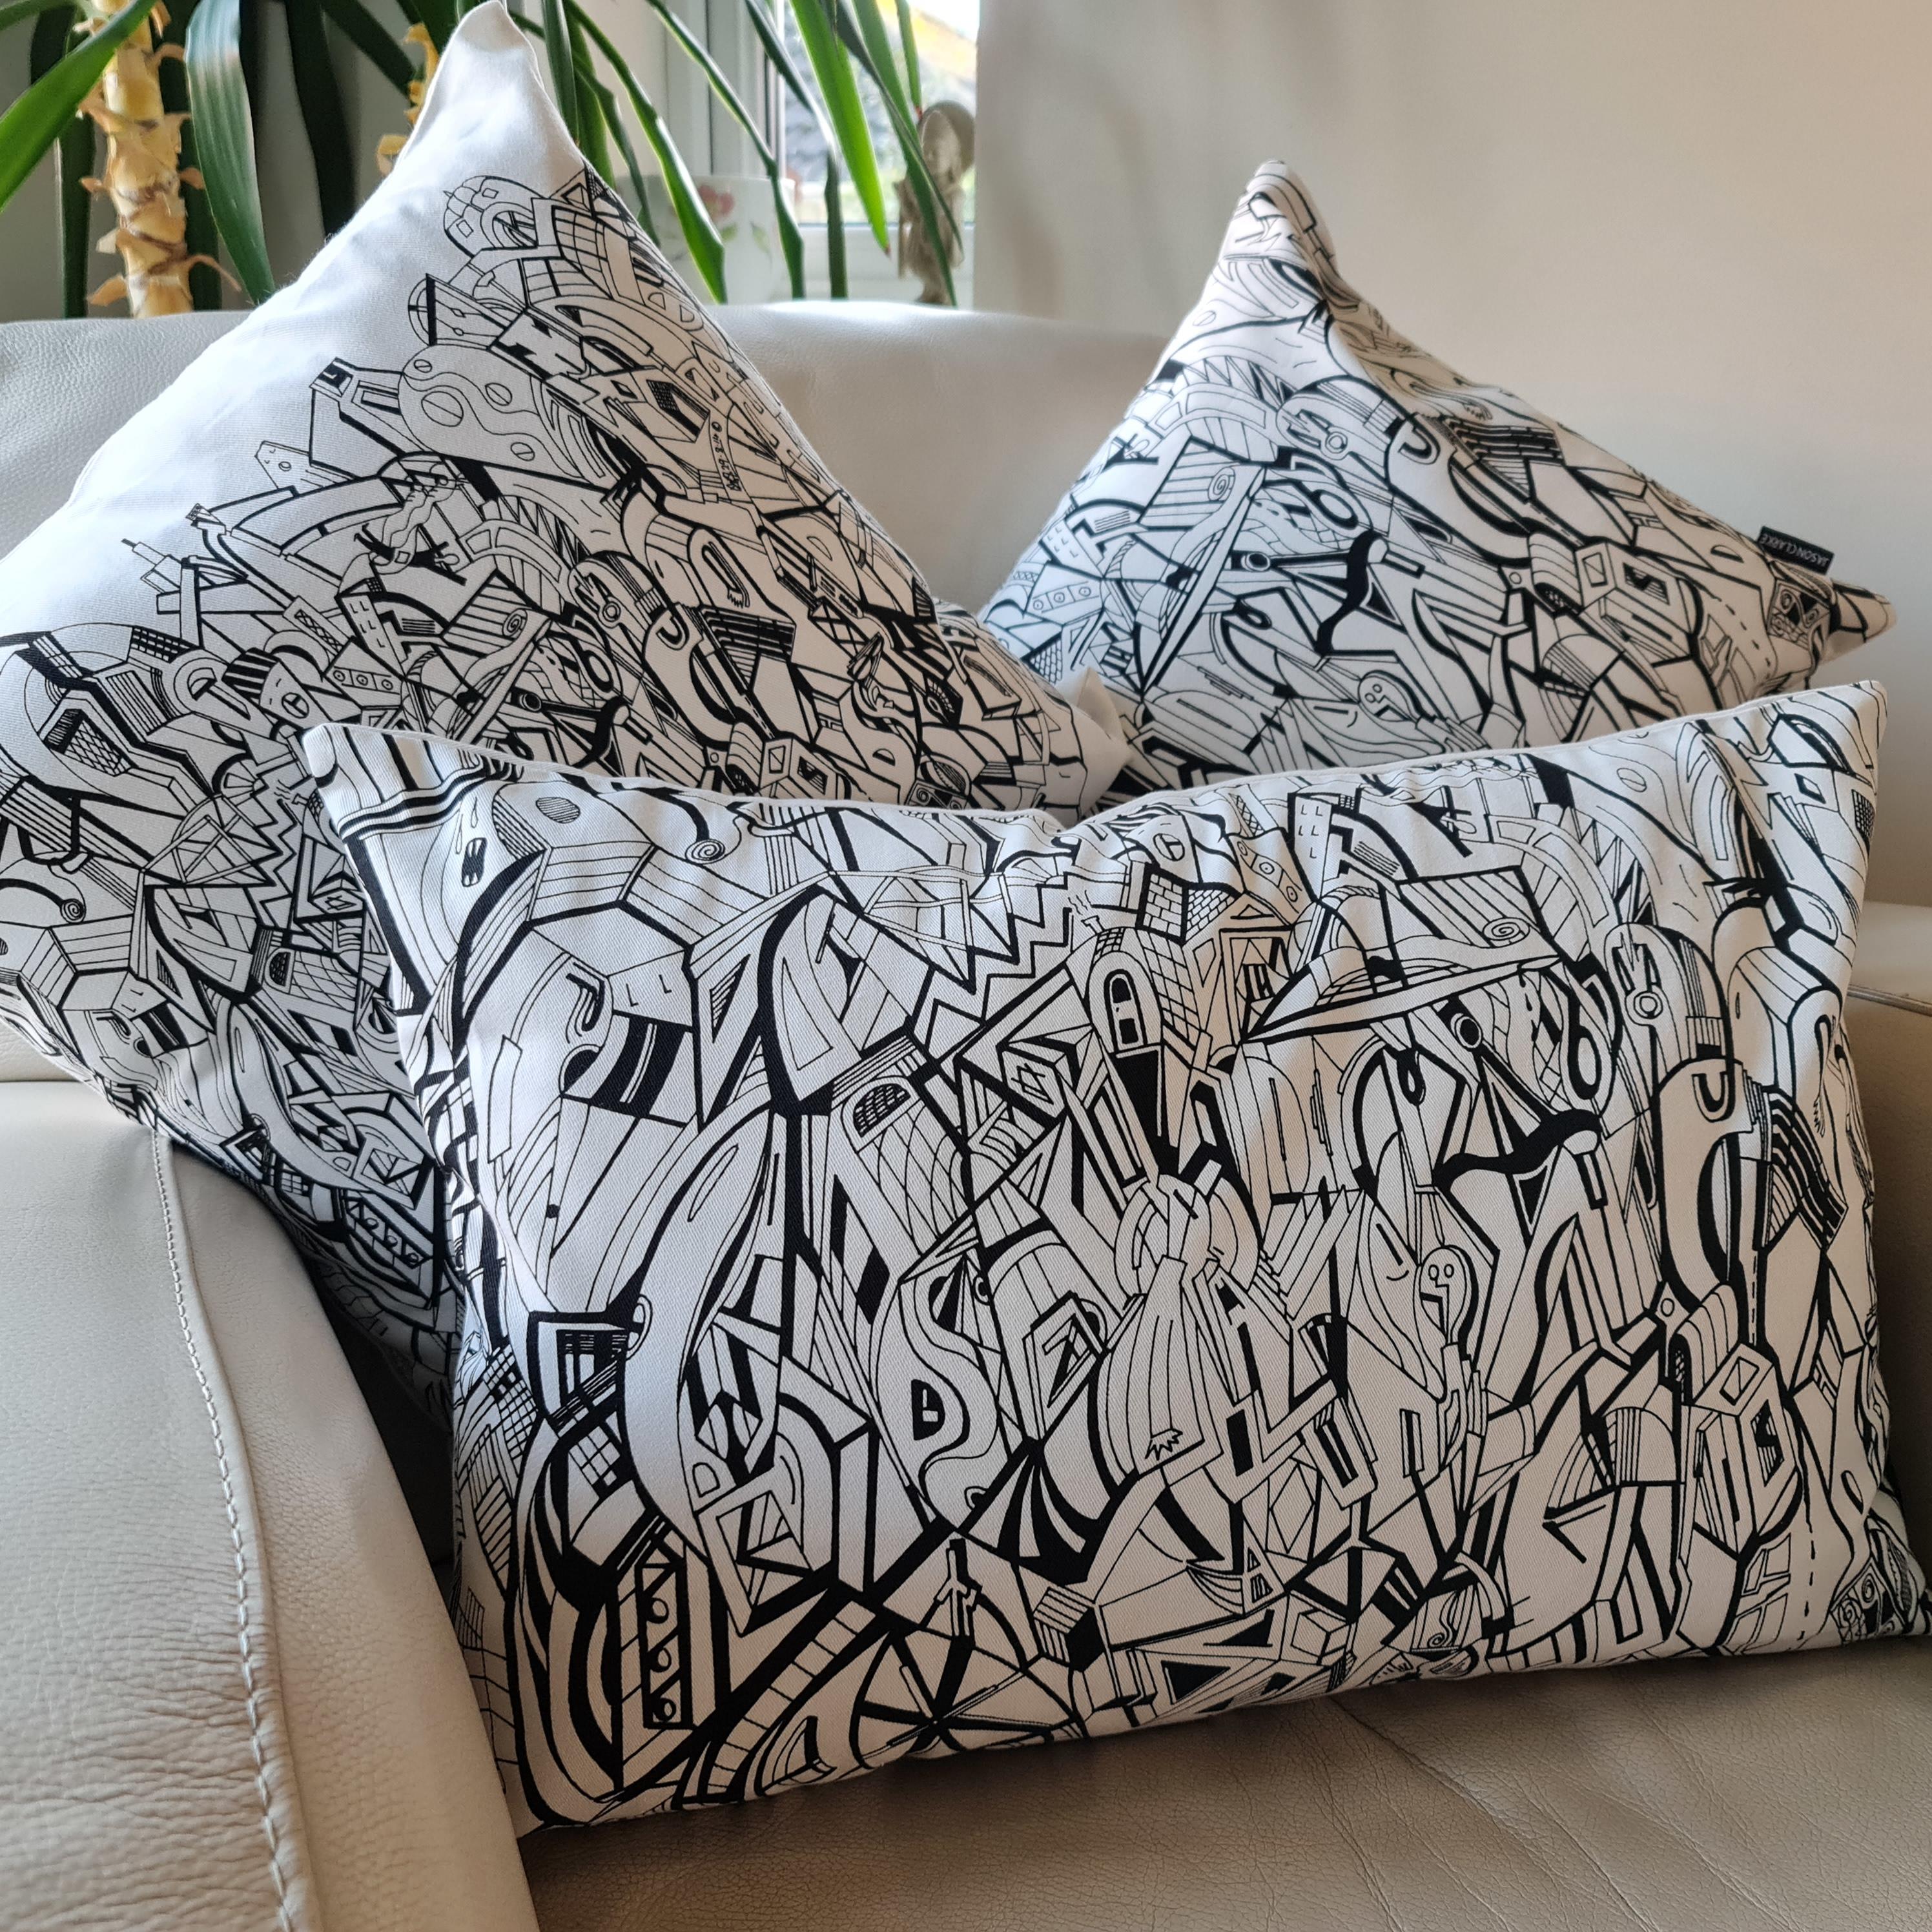 Group photo of cream coloured cotton rectangular cushions with artwork from Jason Clarke printed on the front.